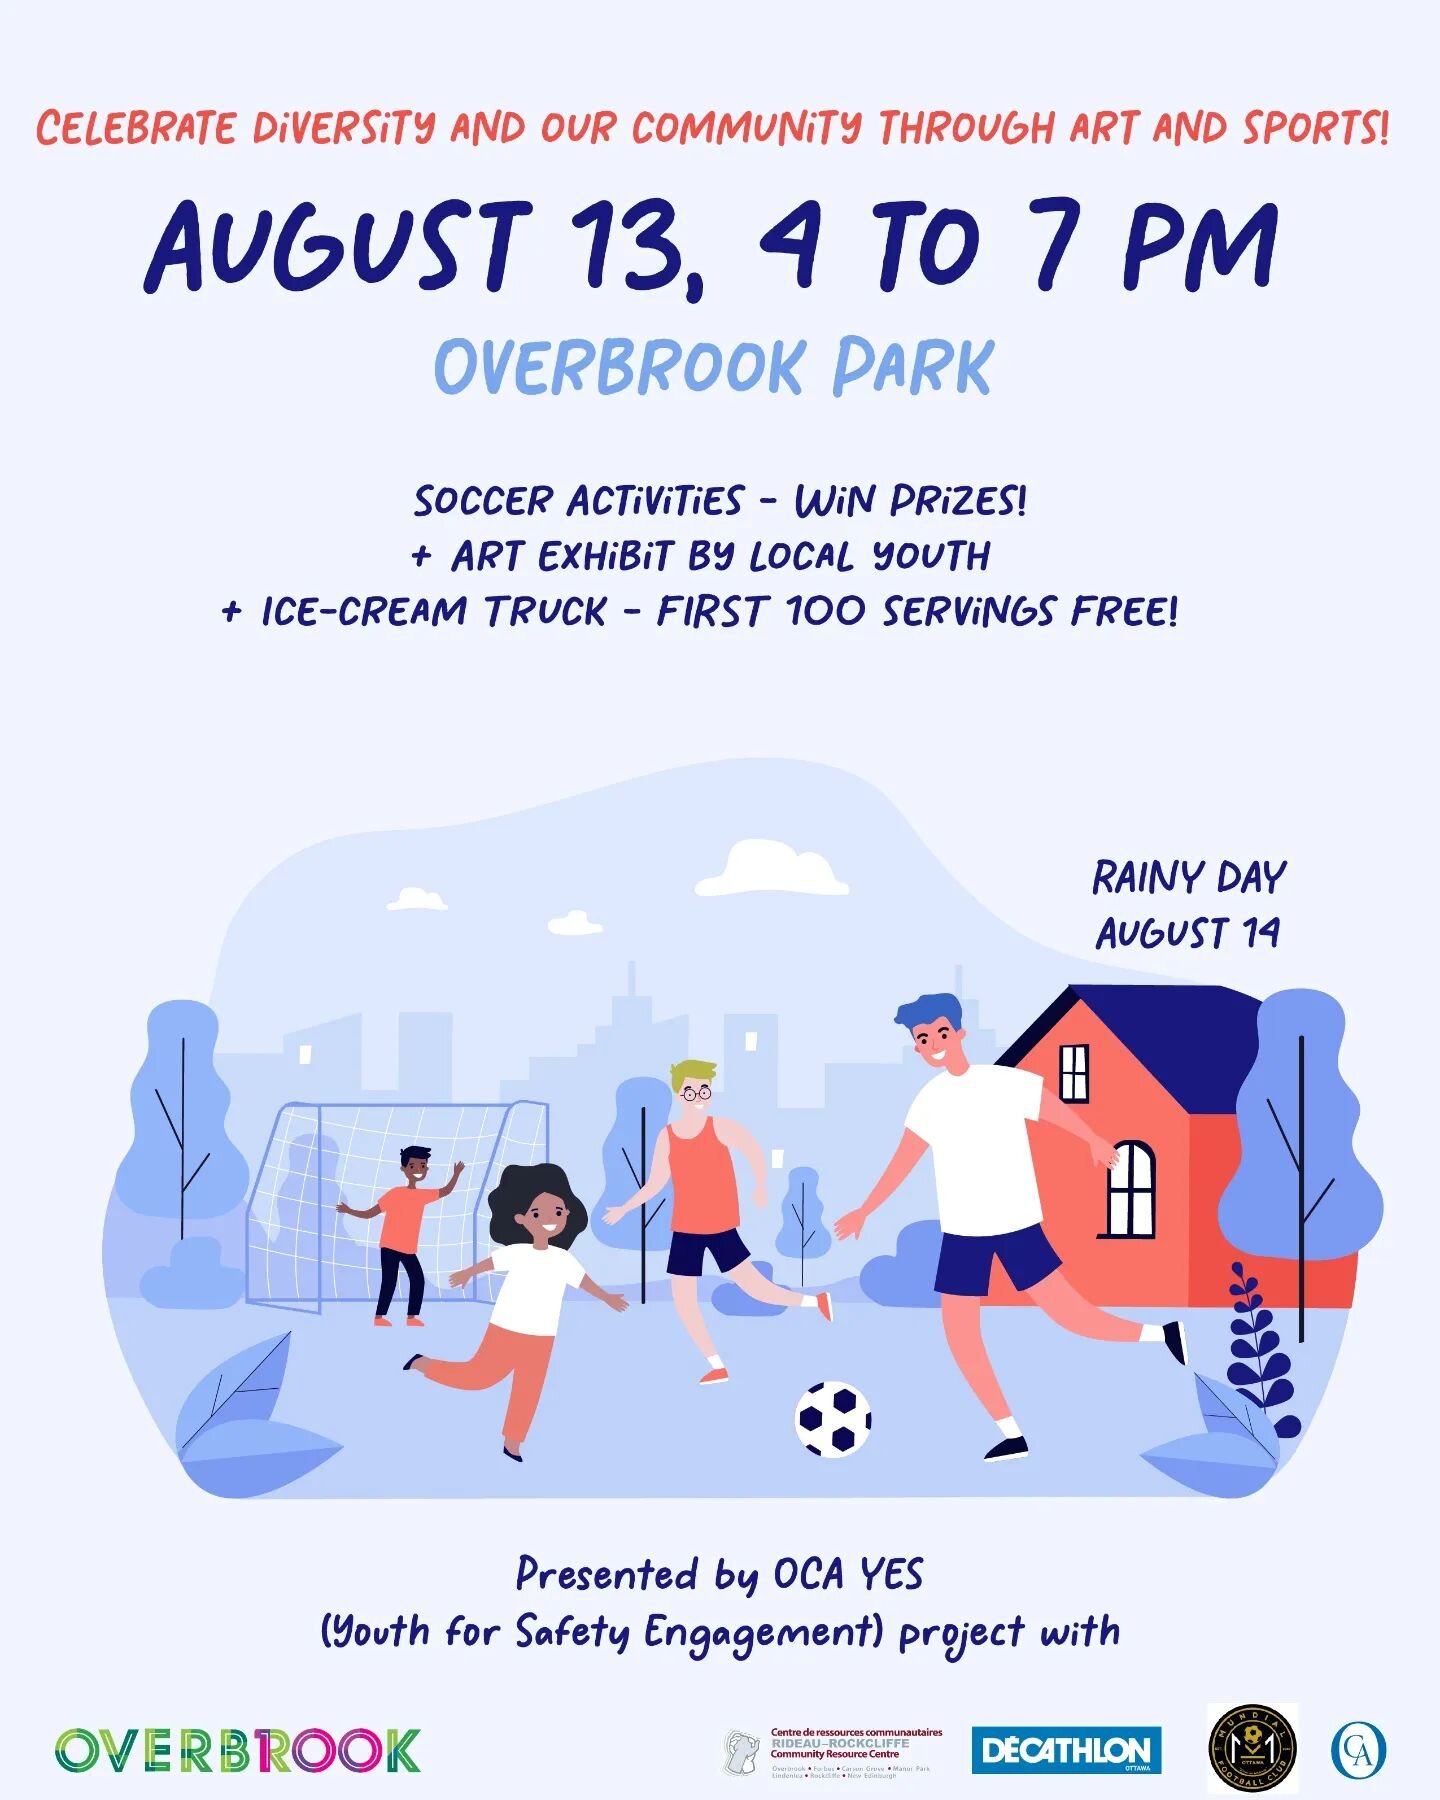 Looking for some fun and sporty activities for your kids? We&rsquo;re looking for kids 11-16 to join our soccer event this Saturday from 4-7 pm!
We have coaches and volunteers from @mundialfcacademy. There will be an art exhibit, games, drills, and s